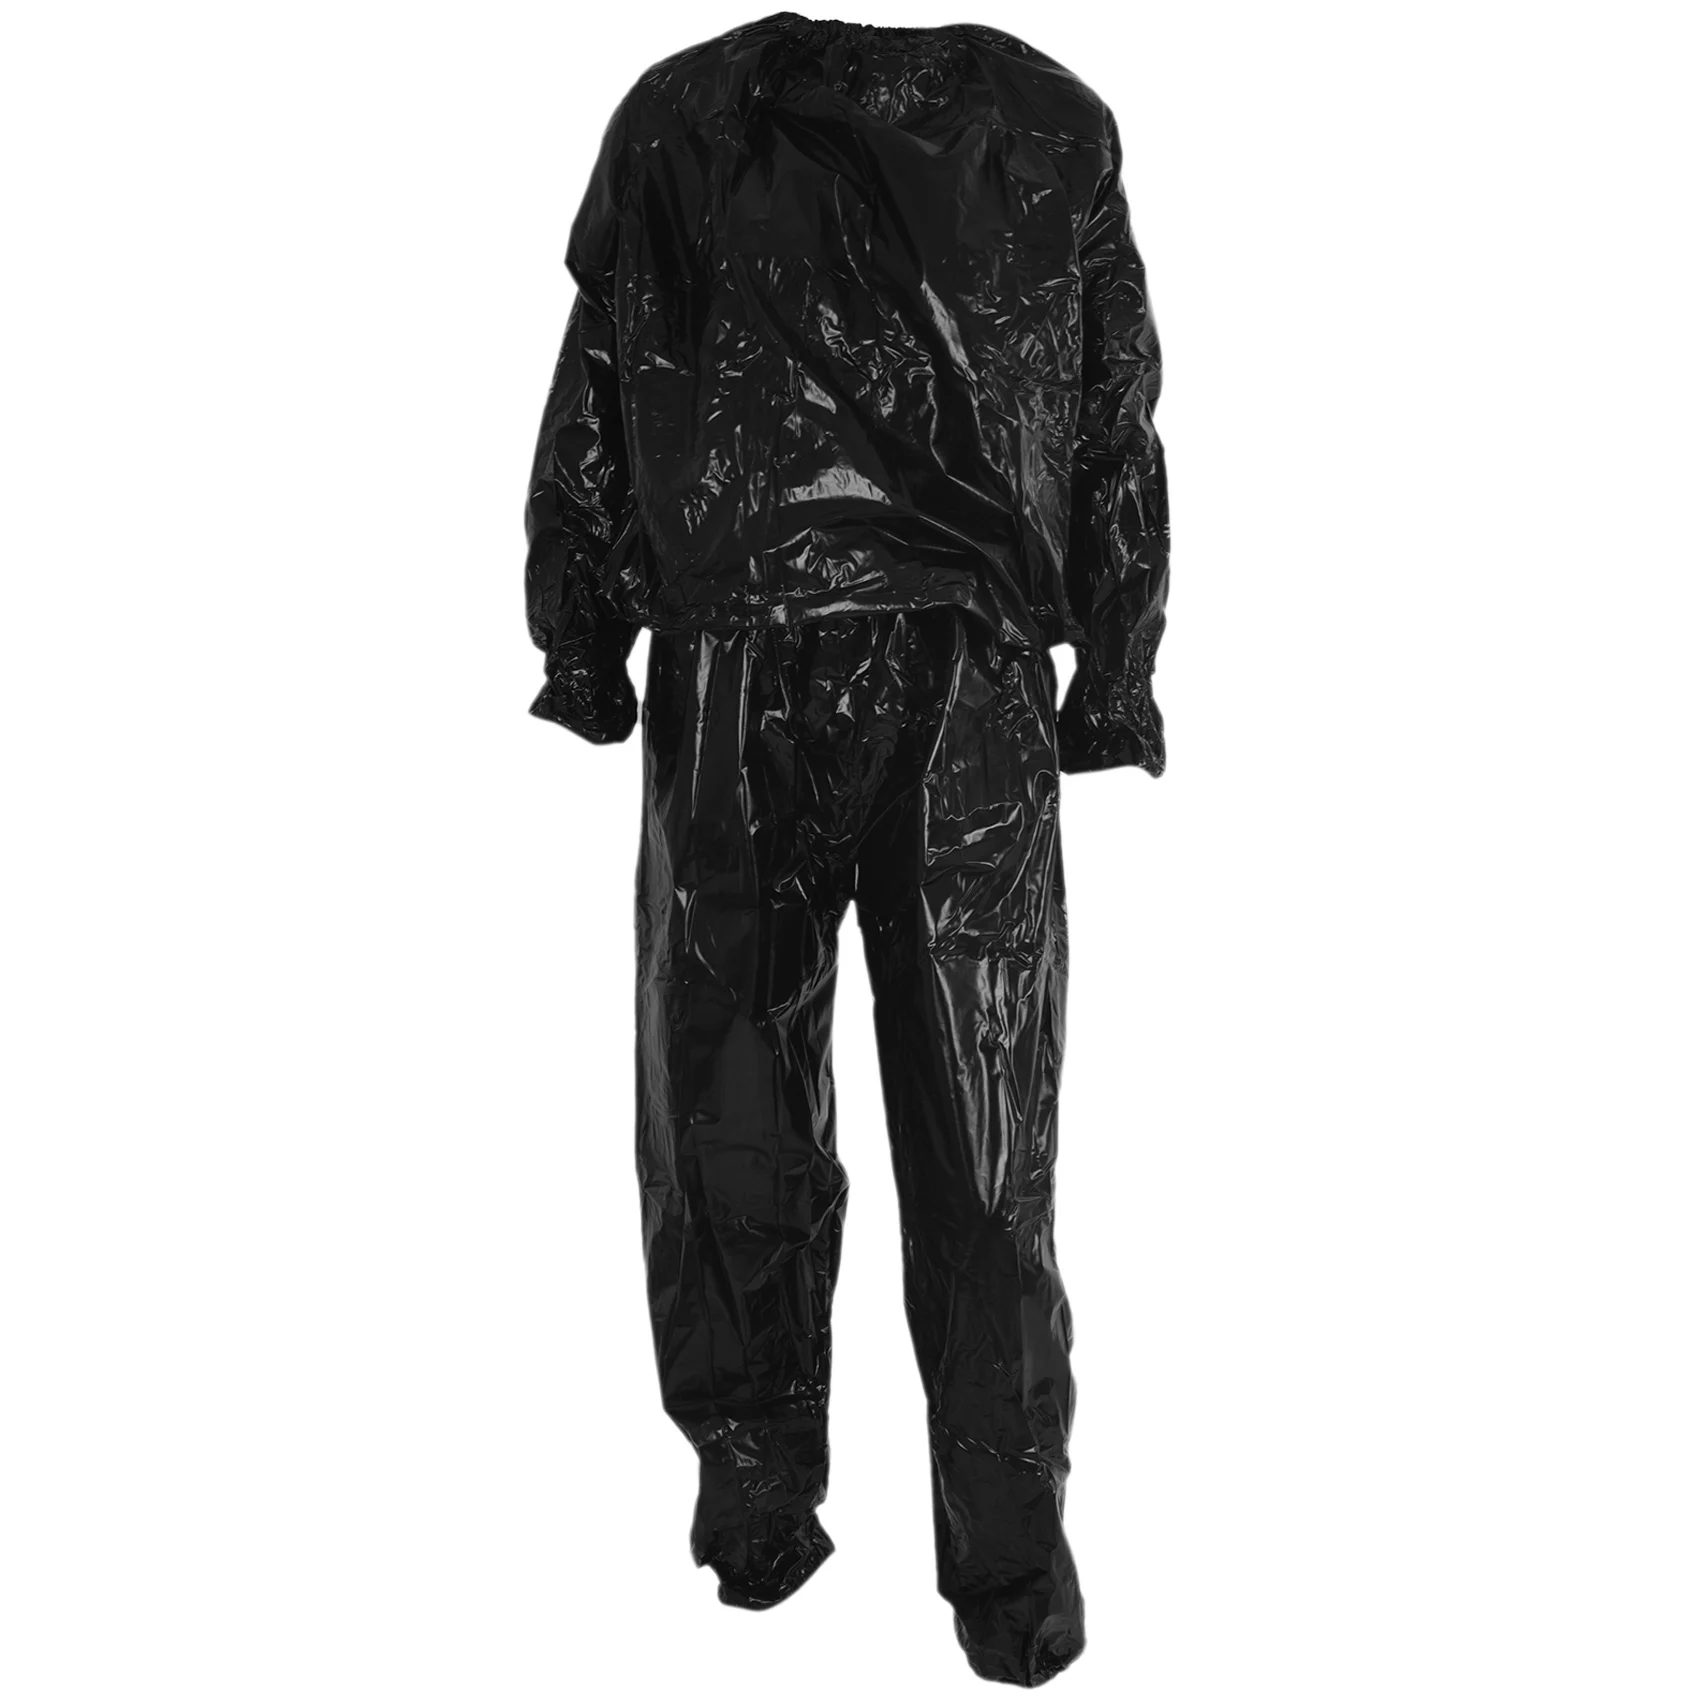 

Heavy Duty Fitness Weight Loss Sweat Sauna Suit Exercise Gym Anti-Rip Black XL